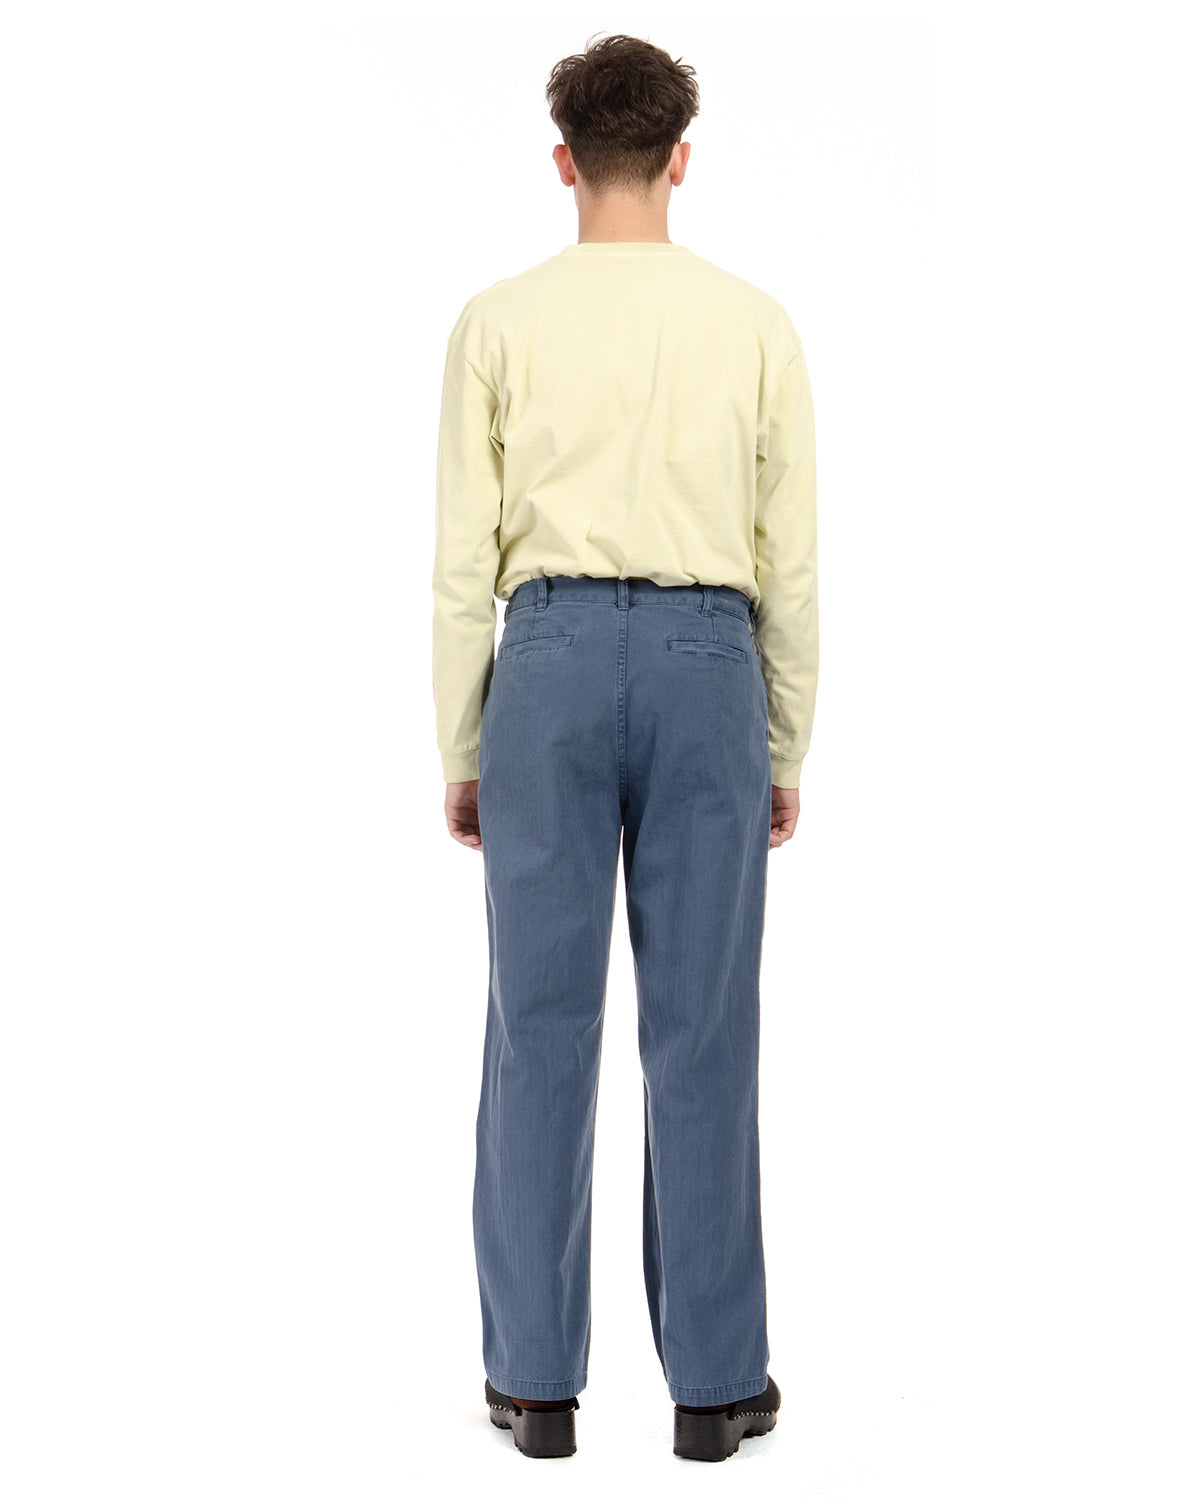 Livewire Pigment Dyed Herringbone Pant - Washed Navy 5